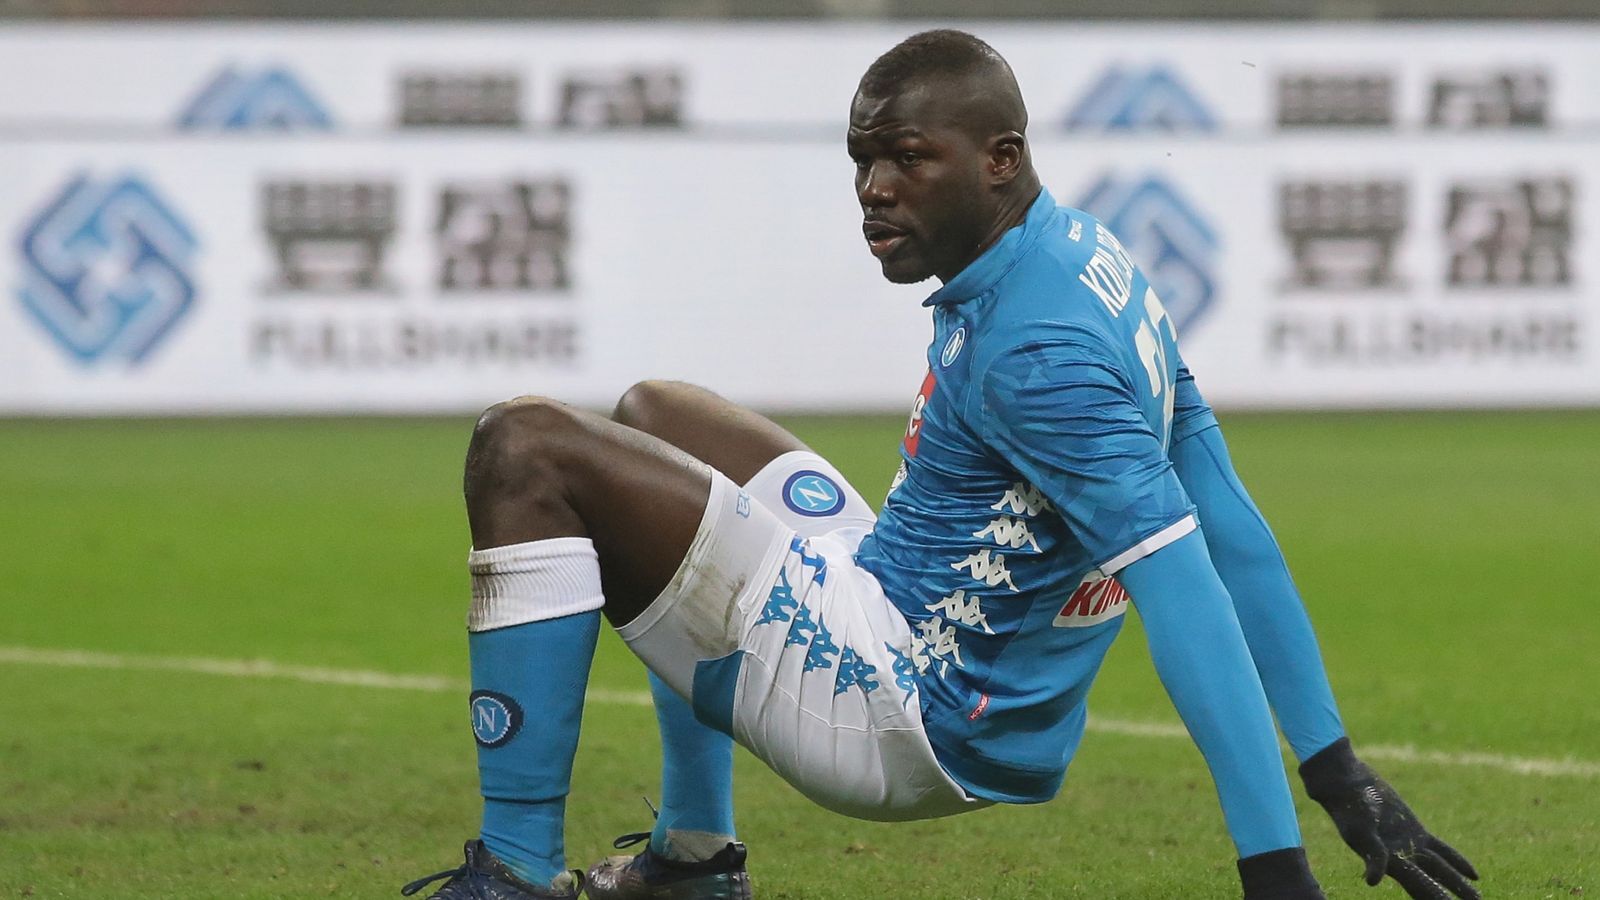 Napoli May Agree to Sell Koulibaly for Cheaper Than 80 Million Pounds